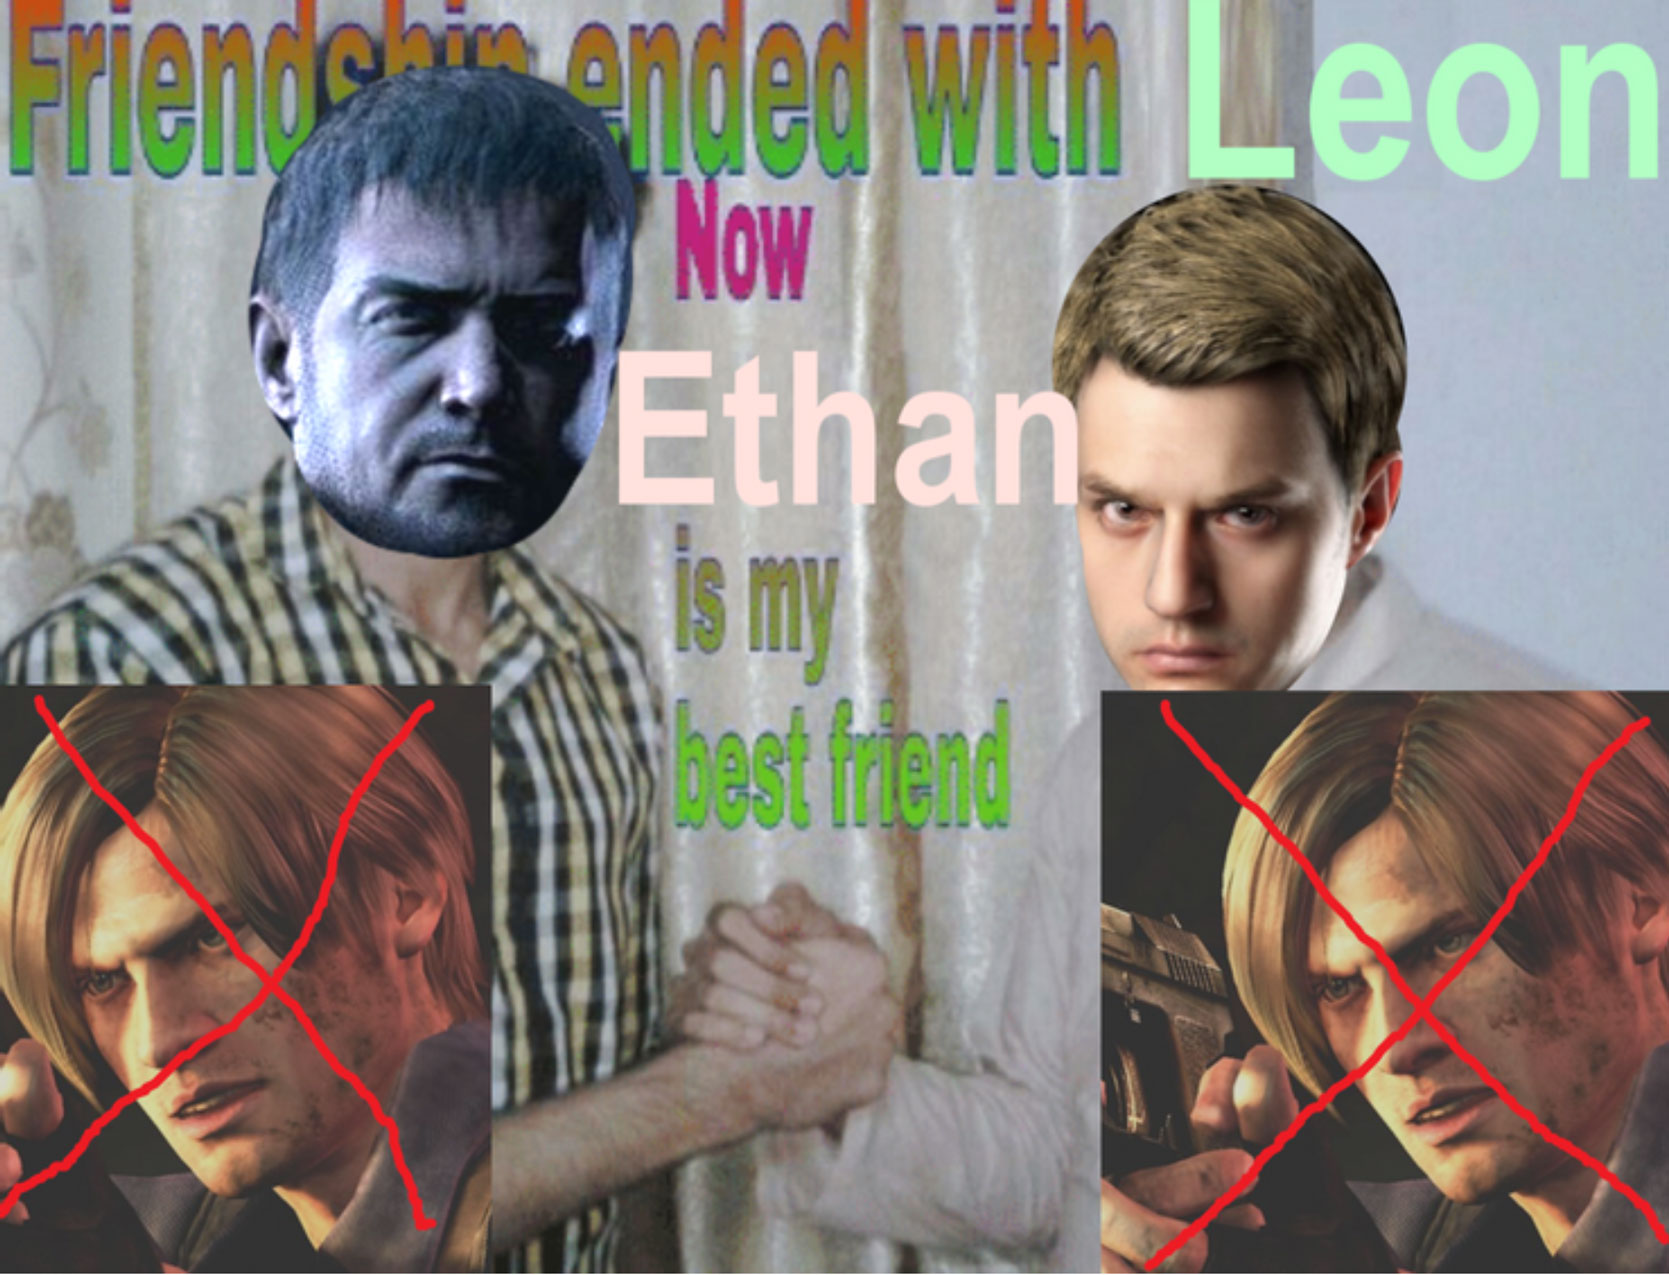 funny gaming memes - sorry ethan resident evil - Friend an ended with Leon Now Ethan